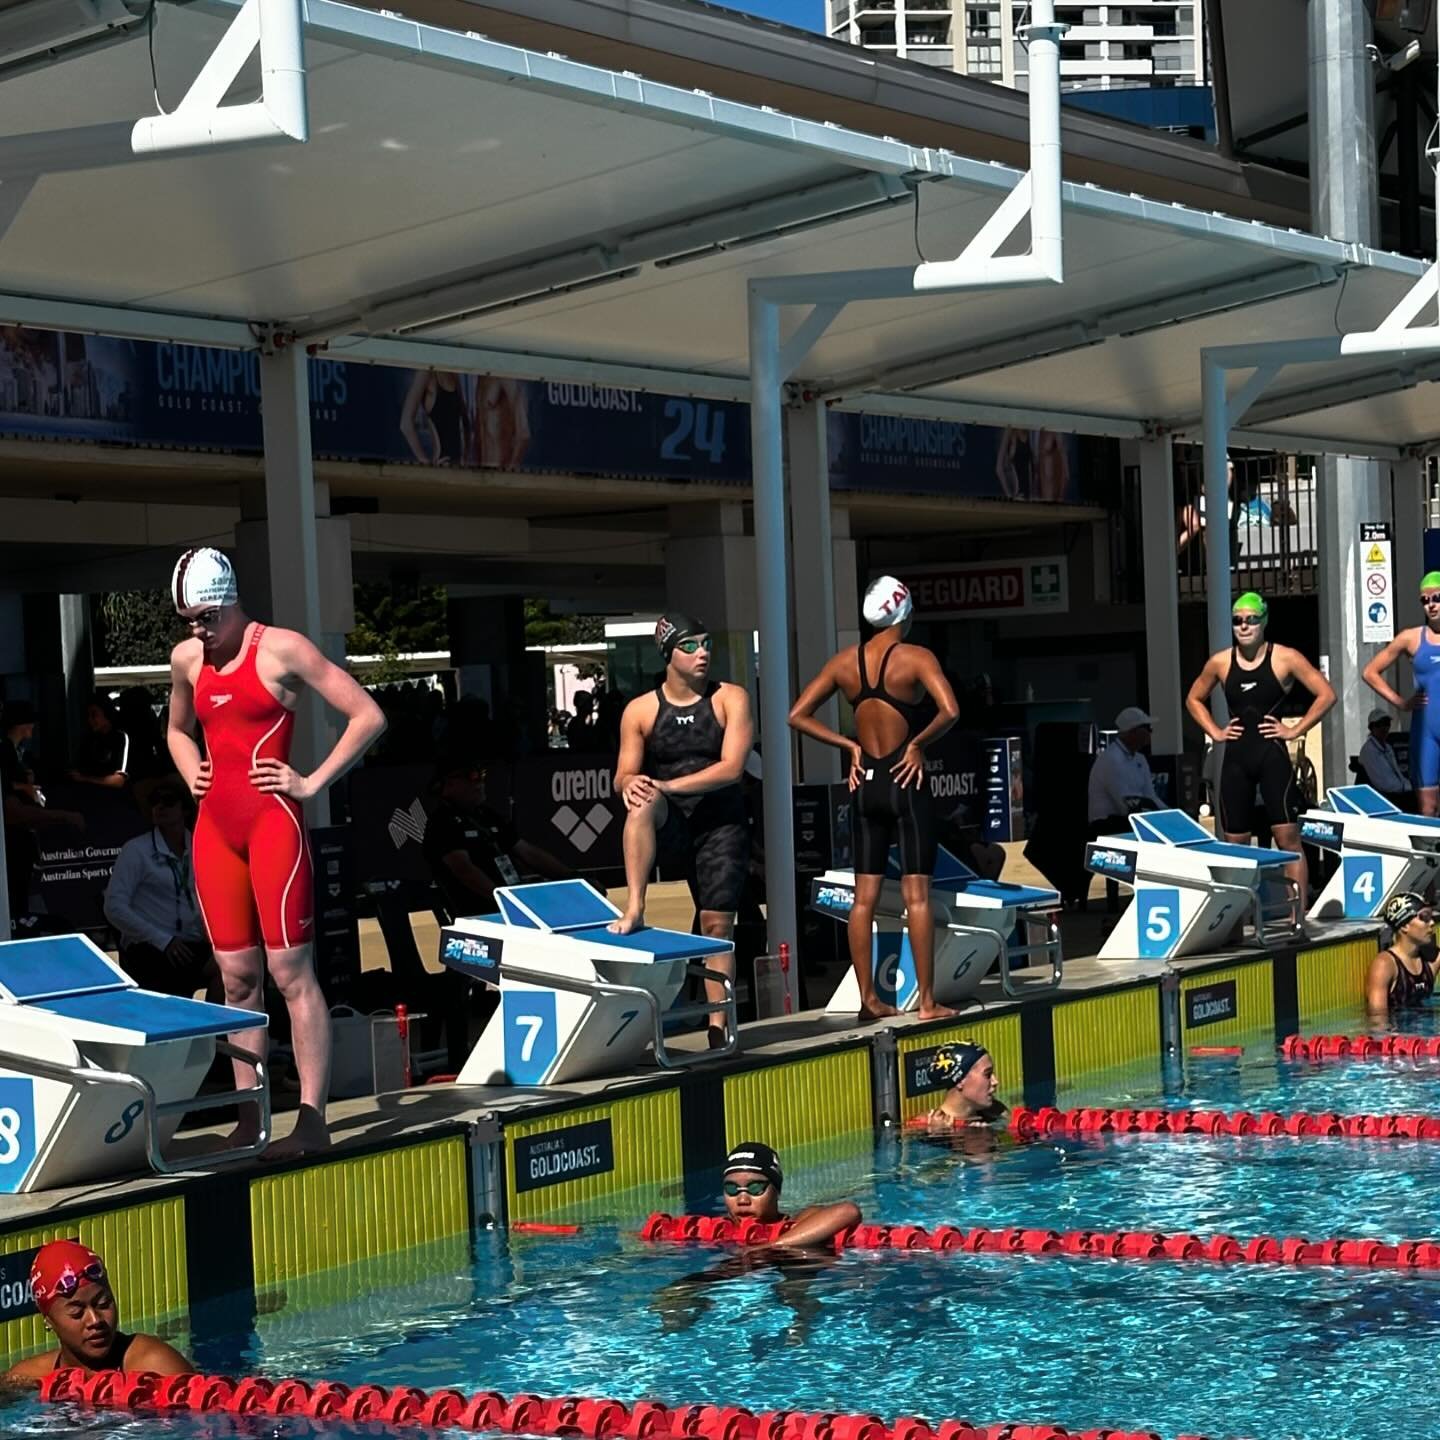 Australian Age Championships
&bull;
Day 5 we had Ruolan and Megan in the 100m Backstroke, Mia in the 100m Butterfly and Alan in the 50m Backstroke. We got off to a great start with Megan and Mia qualifying for the B final of their events and Ruolan w